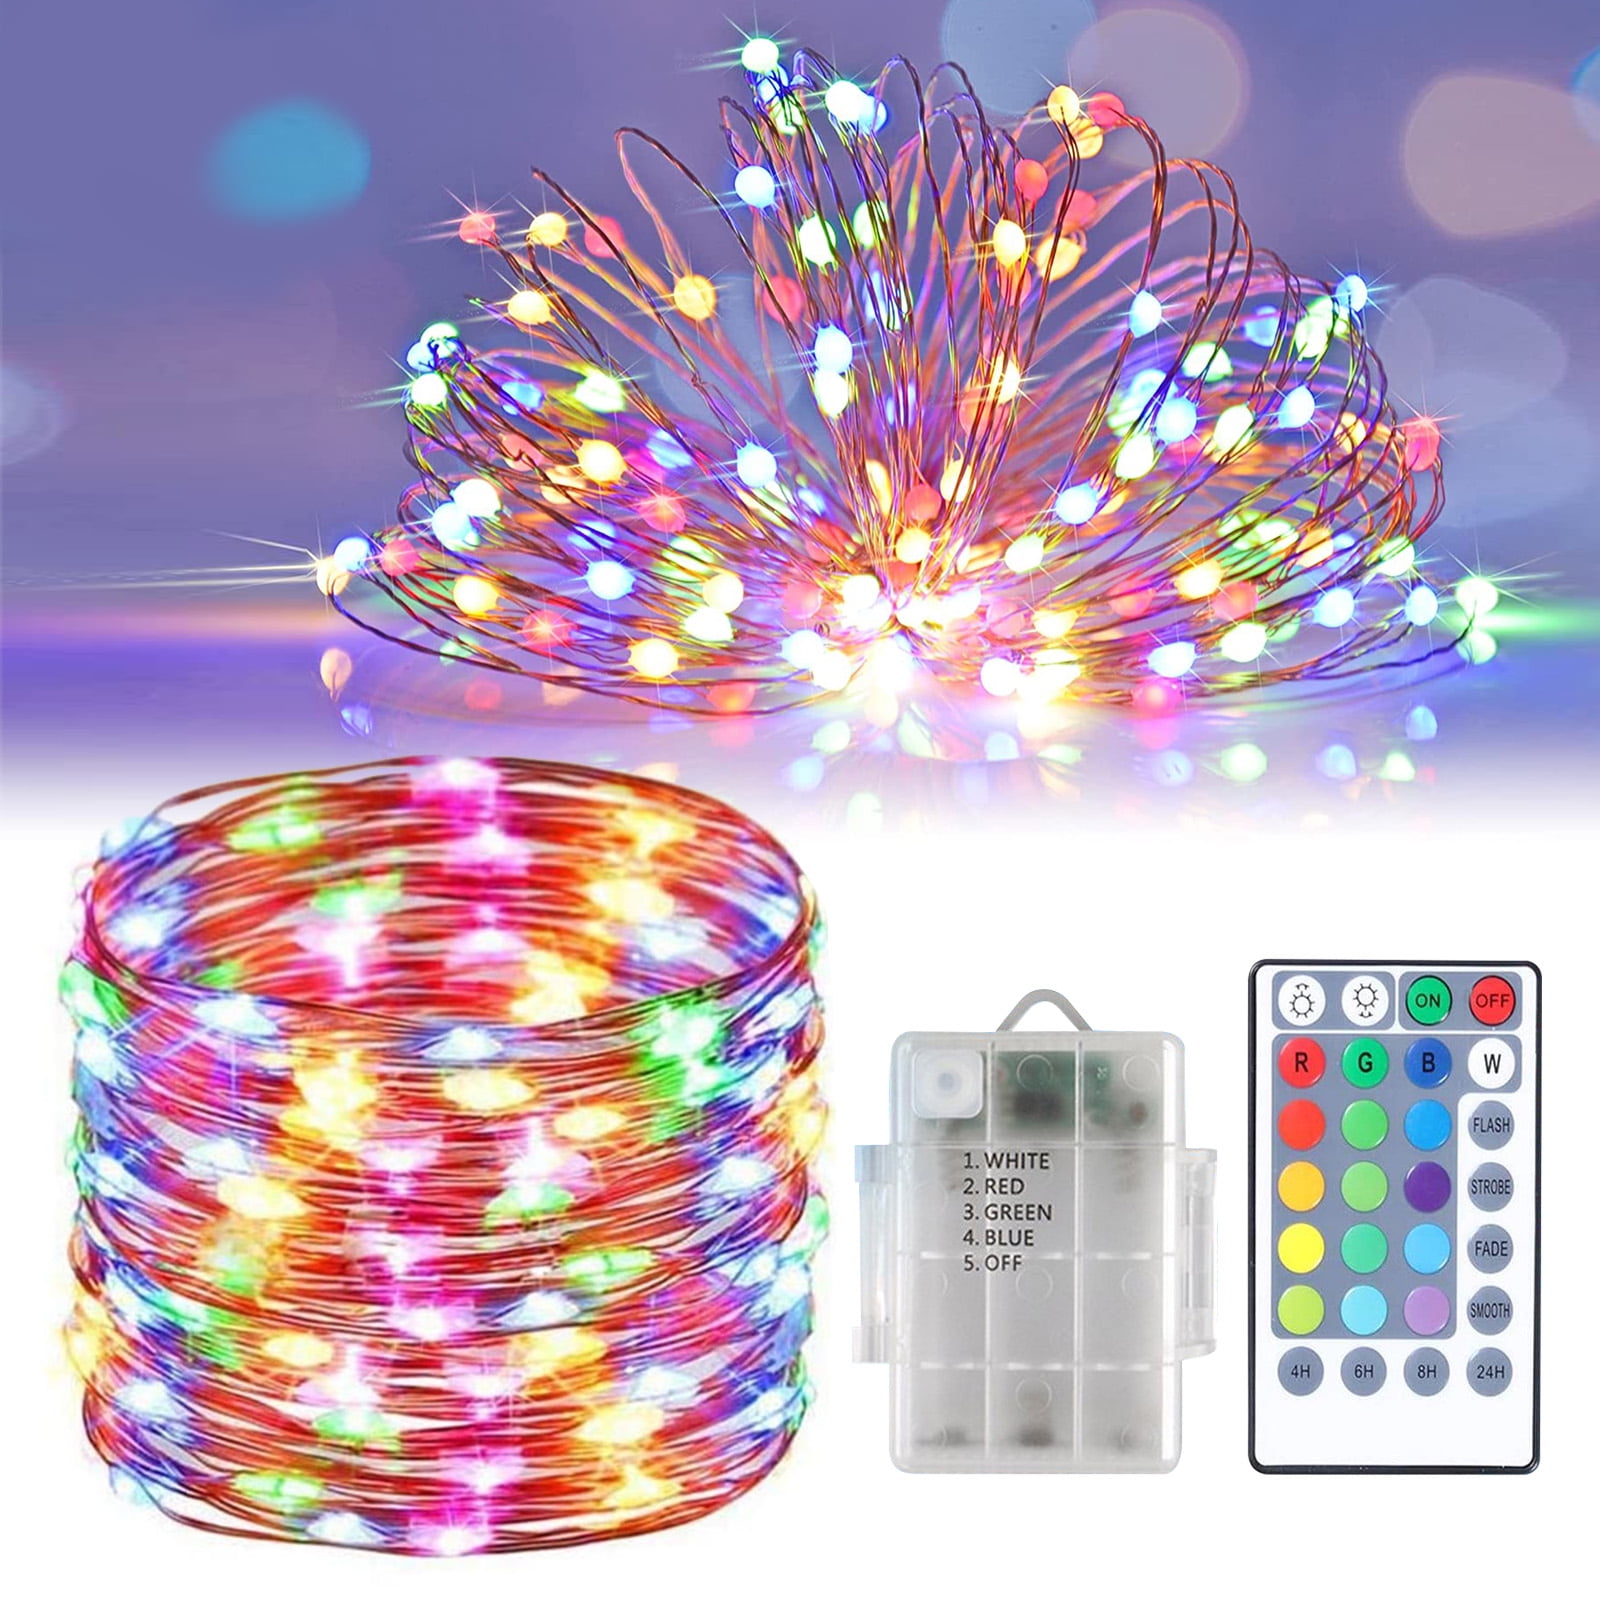 Etopgo Silver Copper Wire Wire 5m 50 LEDs Waterproof Twinkle Valentines Day Decorations Lights for Gifts Bedroom Party Wedding Fairy String Lights Battery Operated Blue